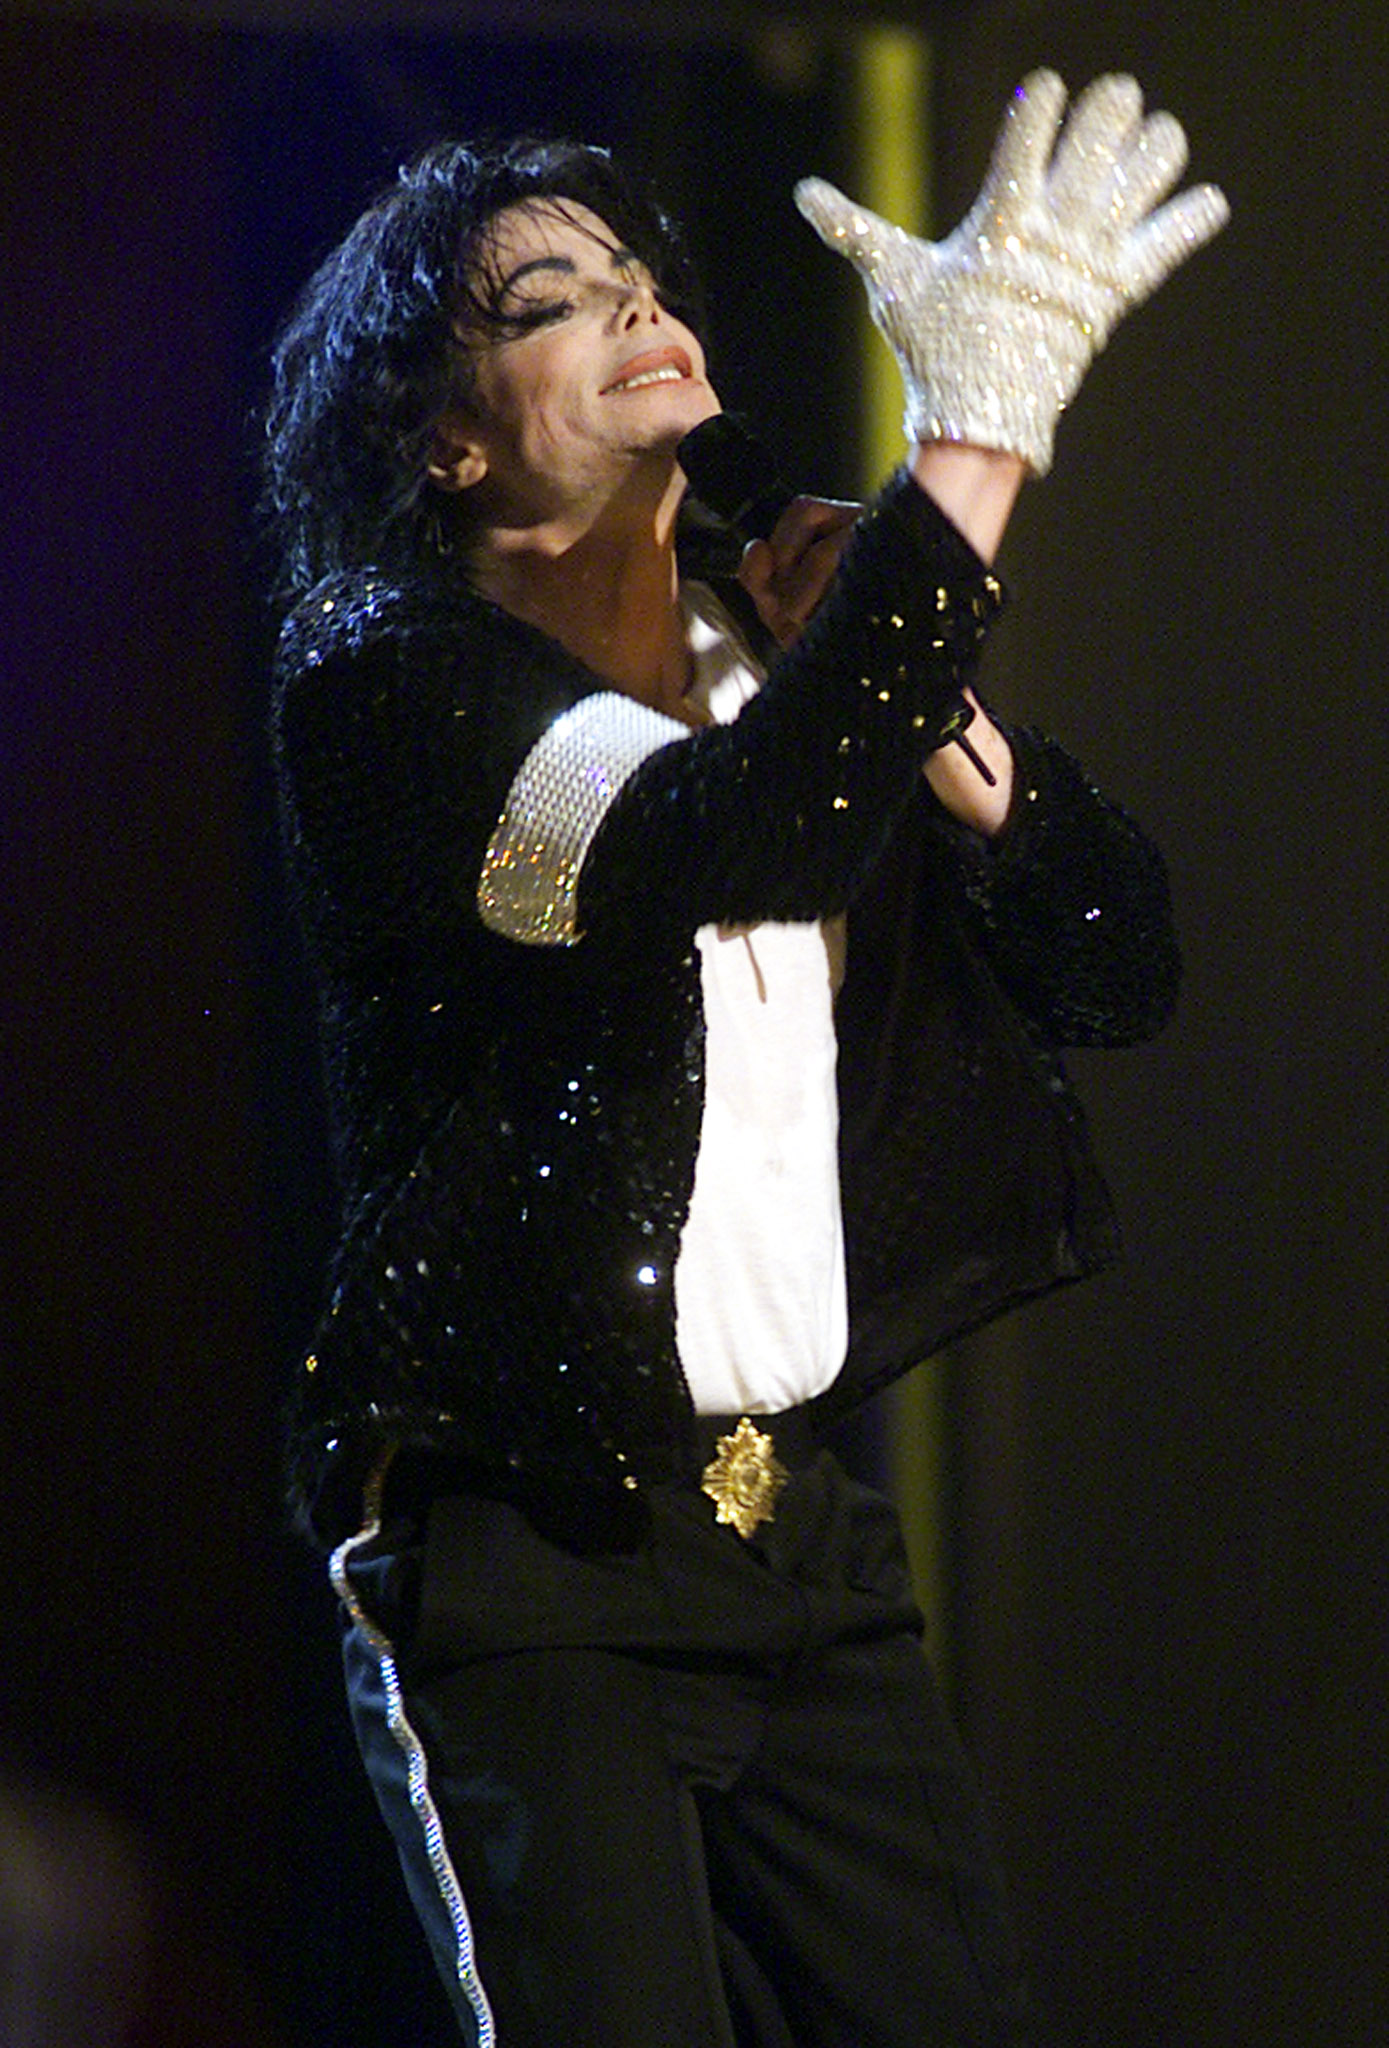 Michael Jackson sports a white glove during a concert in New York on September 7, 2001 | Source: Getty Images